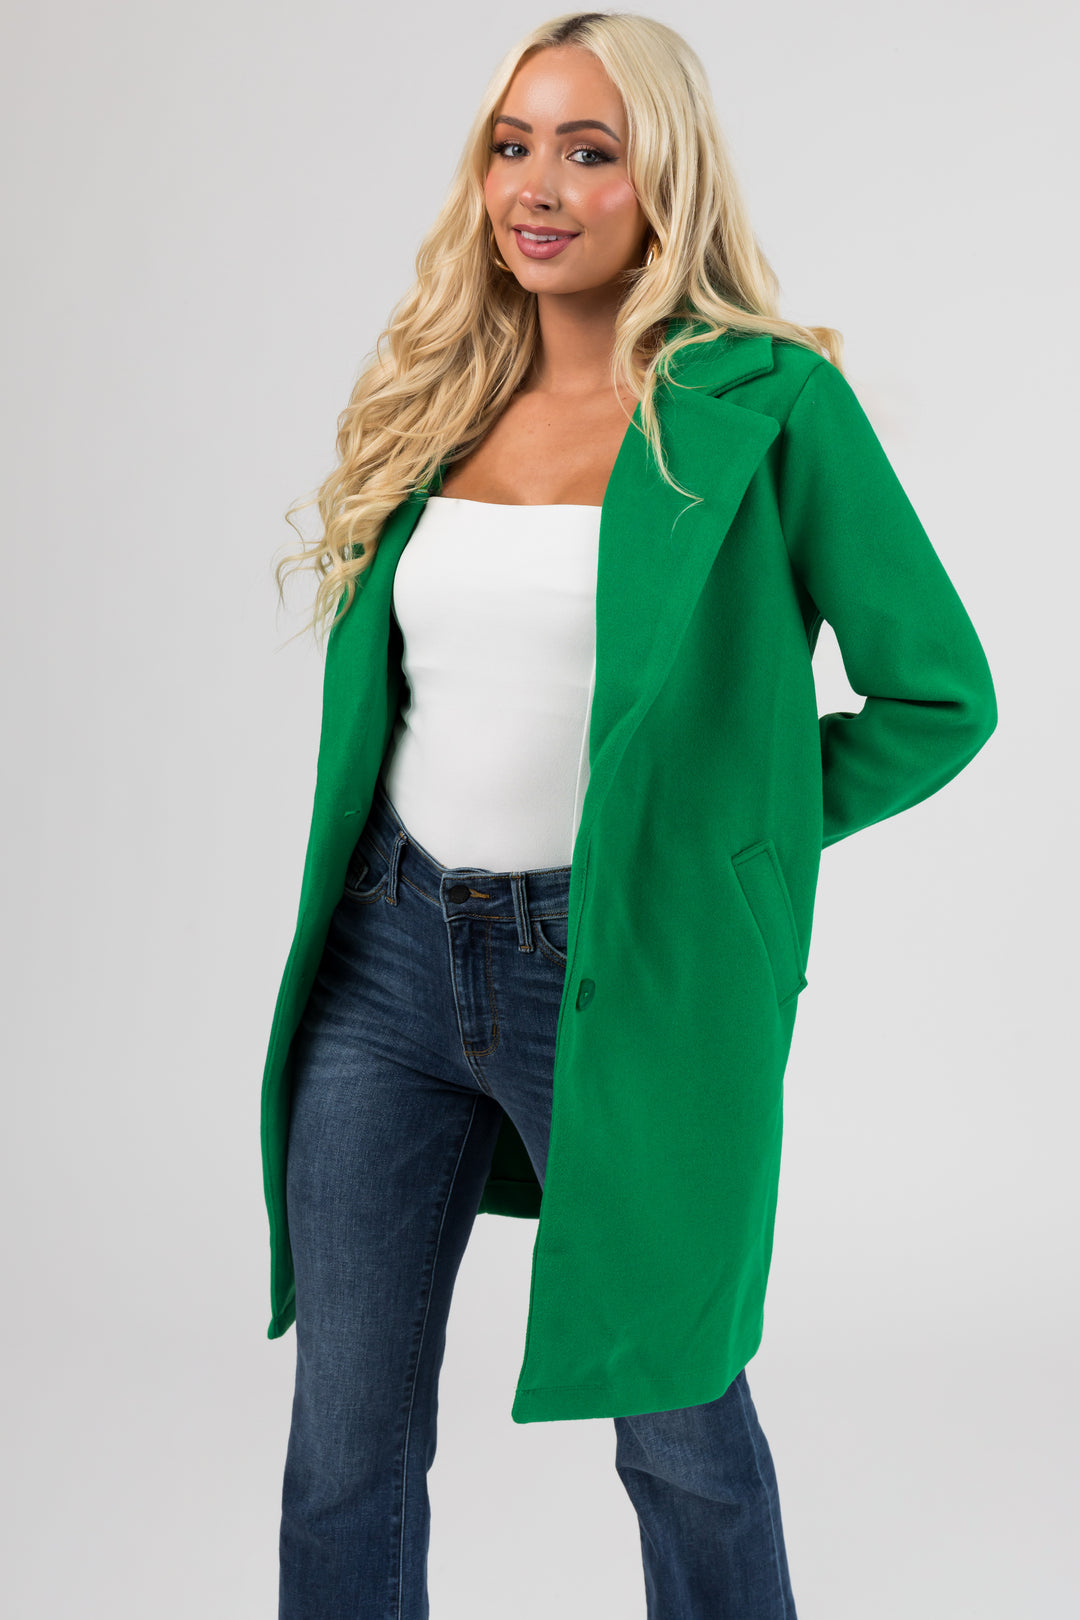 Kelly Green Collared V Neck Buttoned Coat & Lime Lush